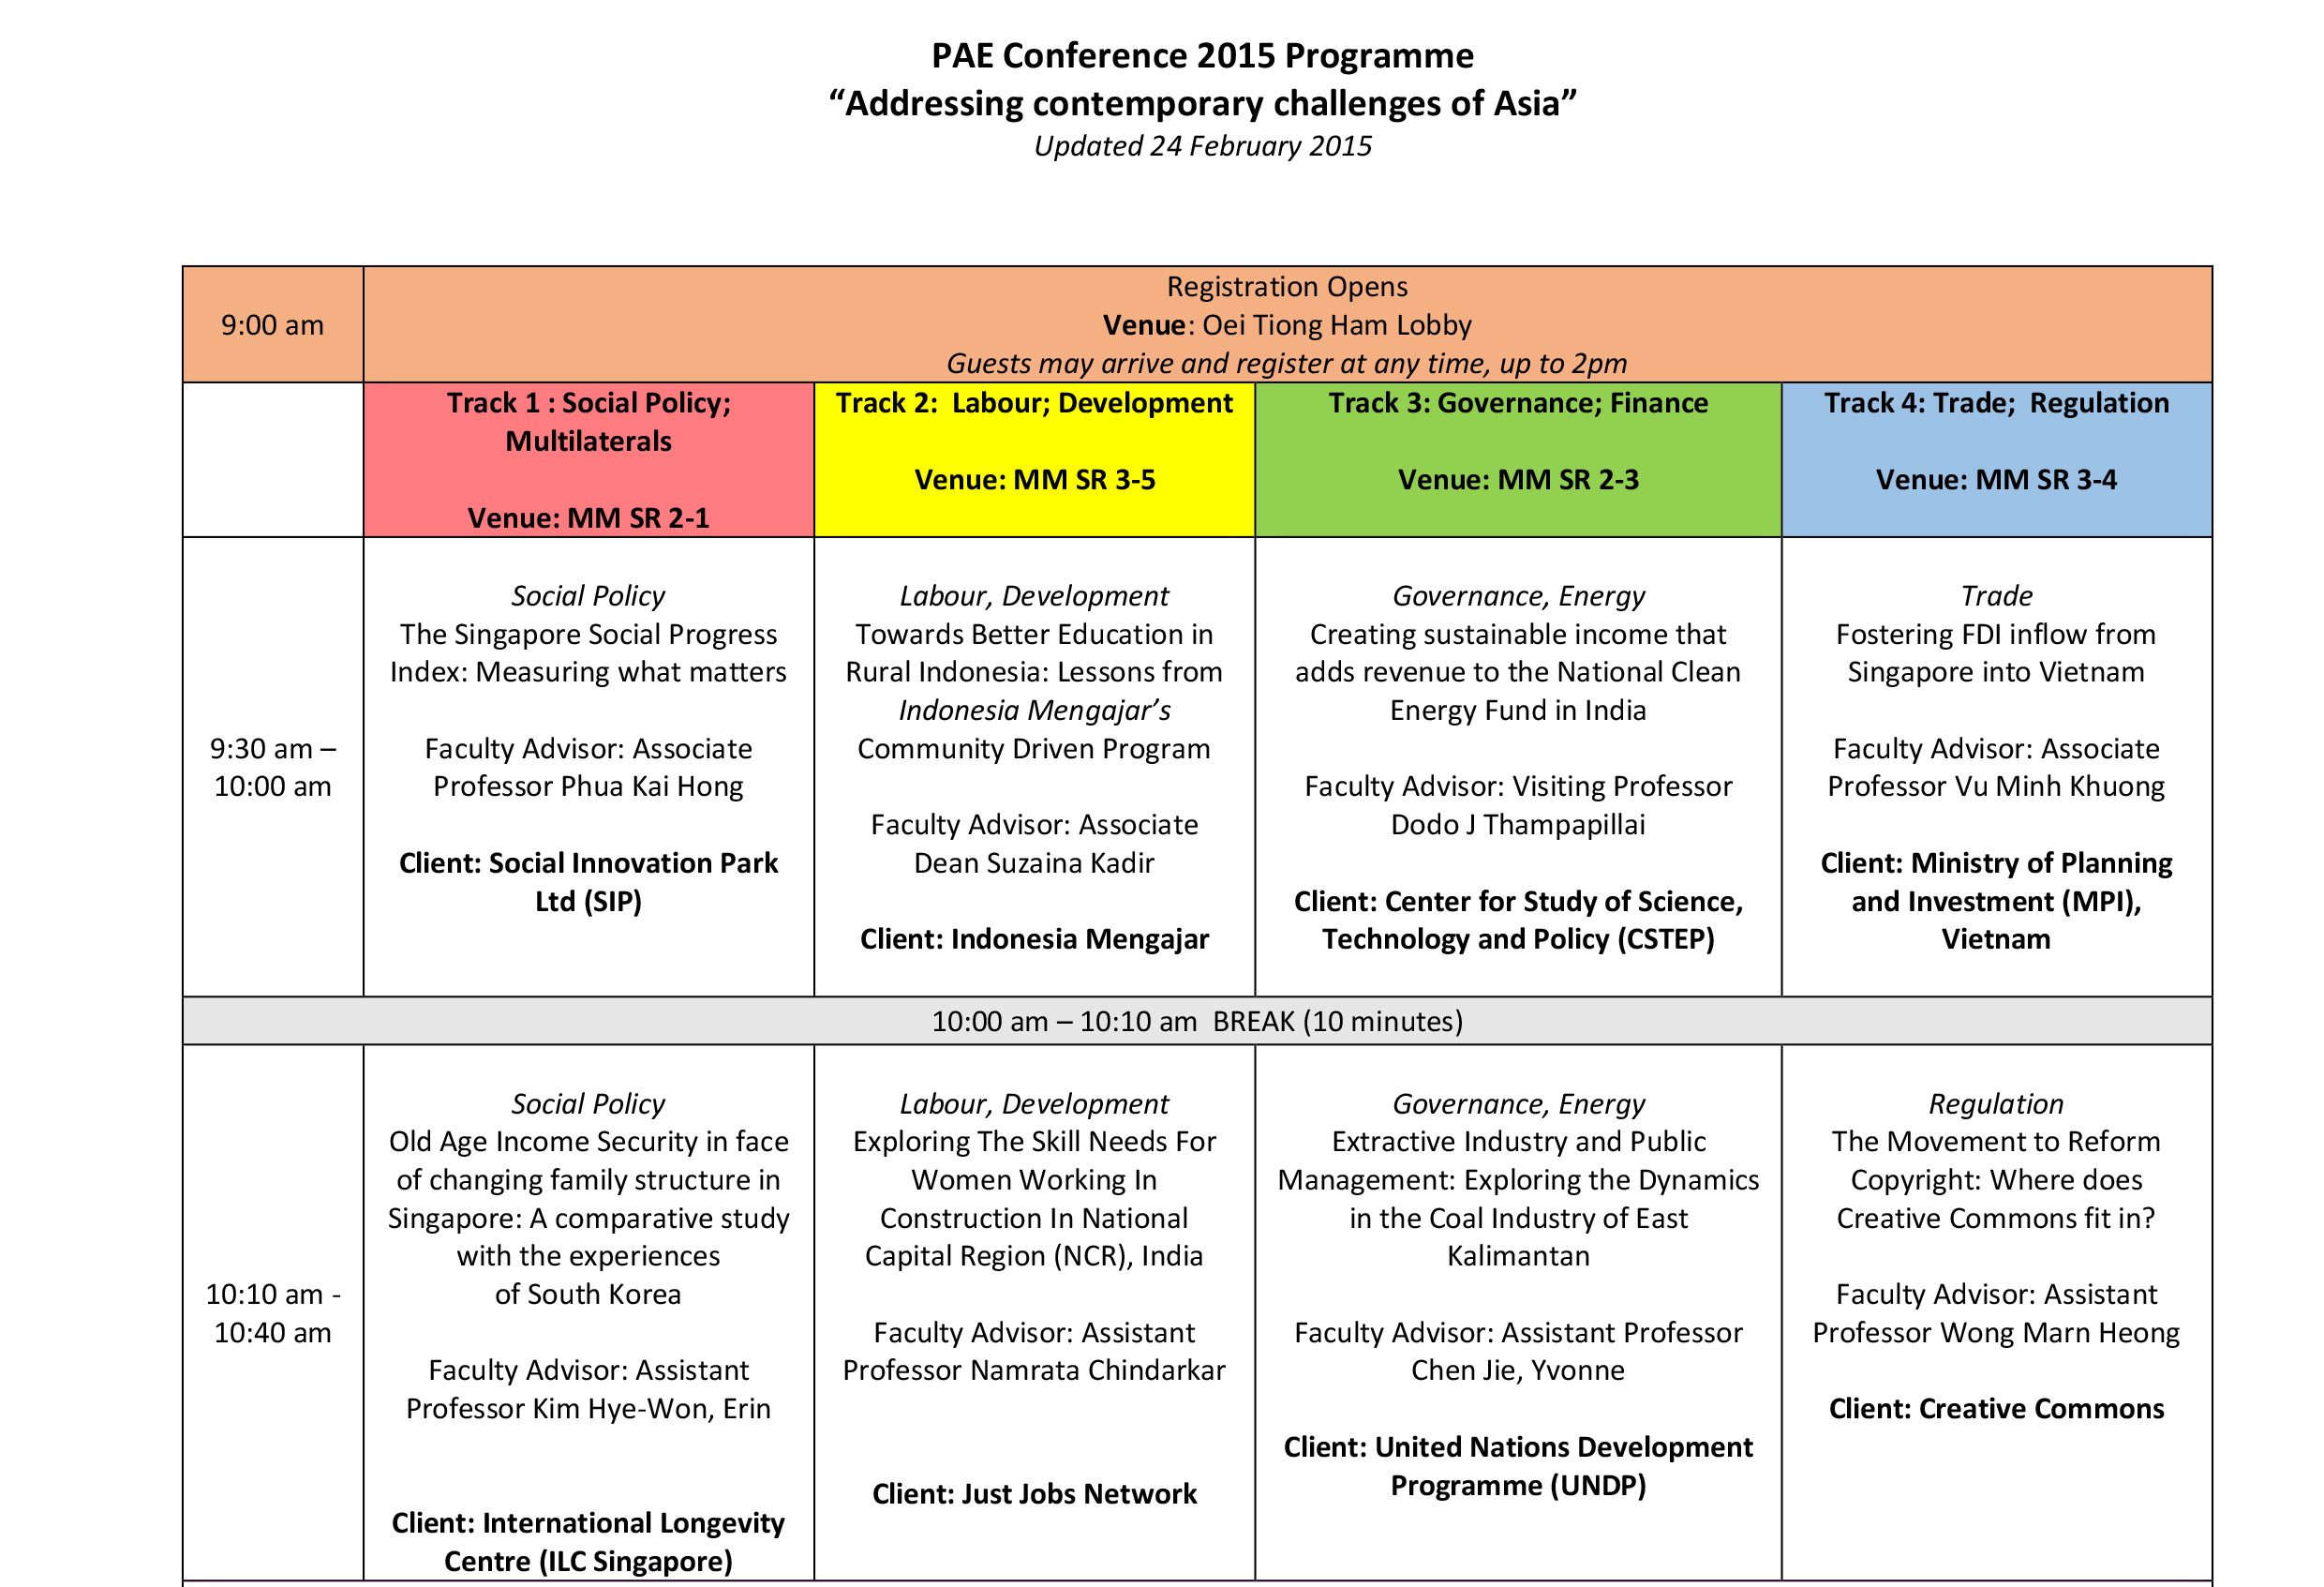 PAE Conference Schedule